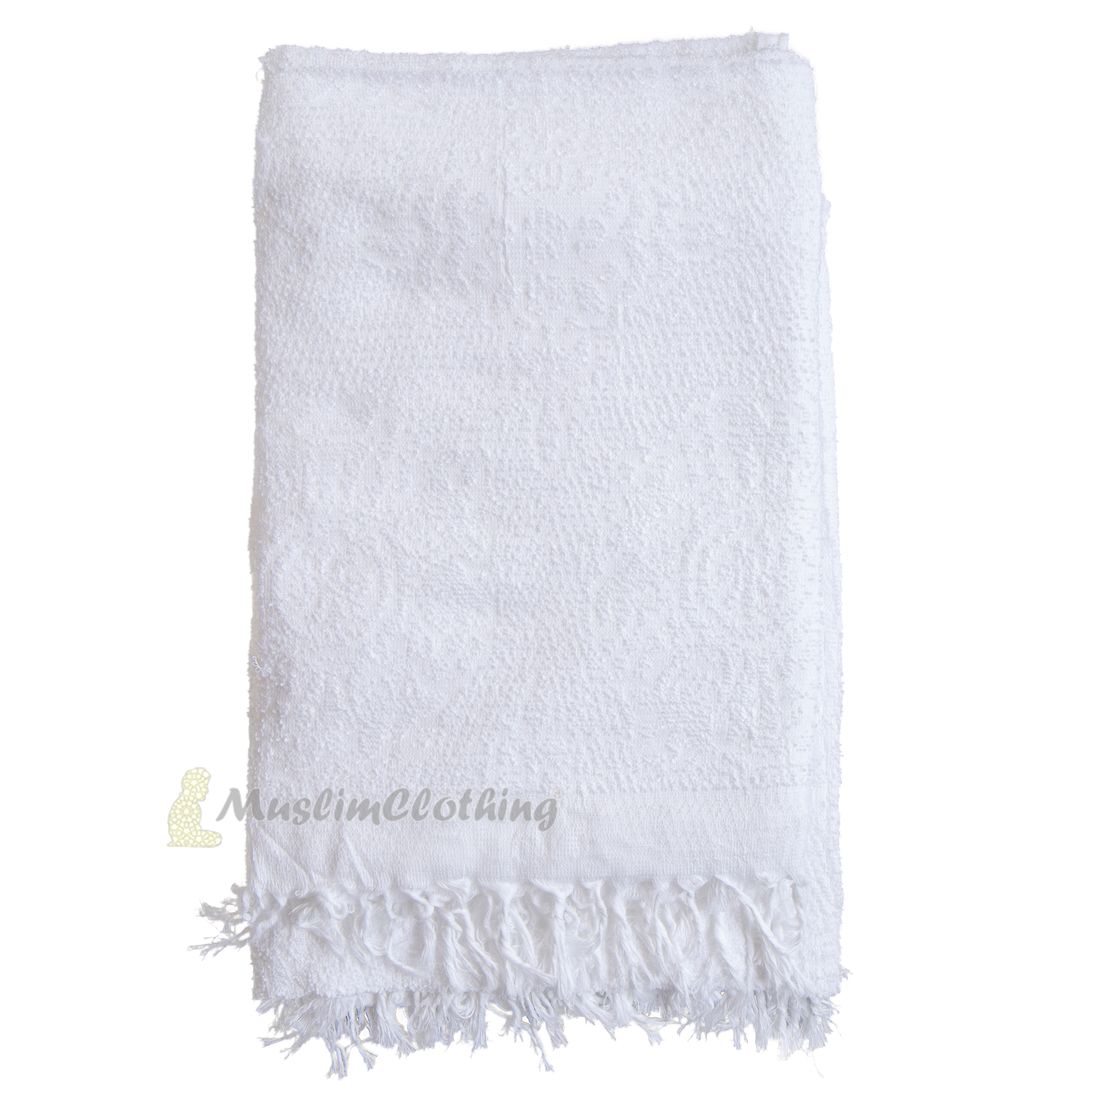 Hajj & Umrah Ihram Set of 2 – Comfortable Durable 86×43-inch 220x110cm 100% Polyester Hand-Wash Only Perfect for Pilgrimage